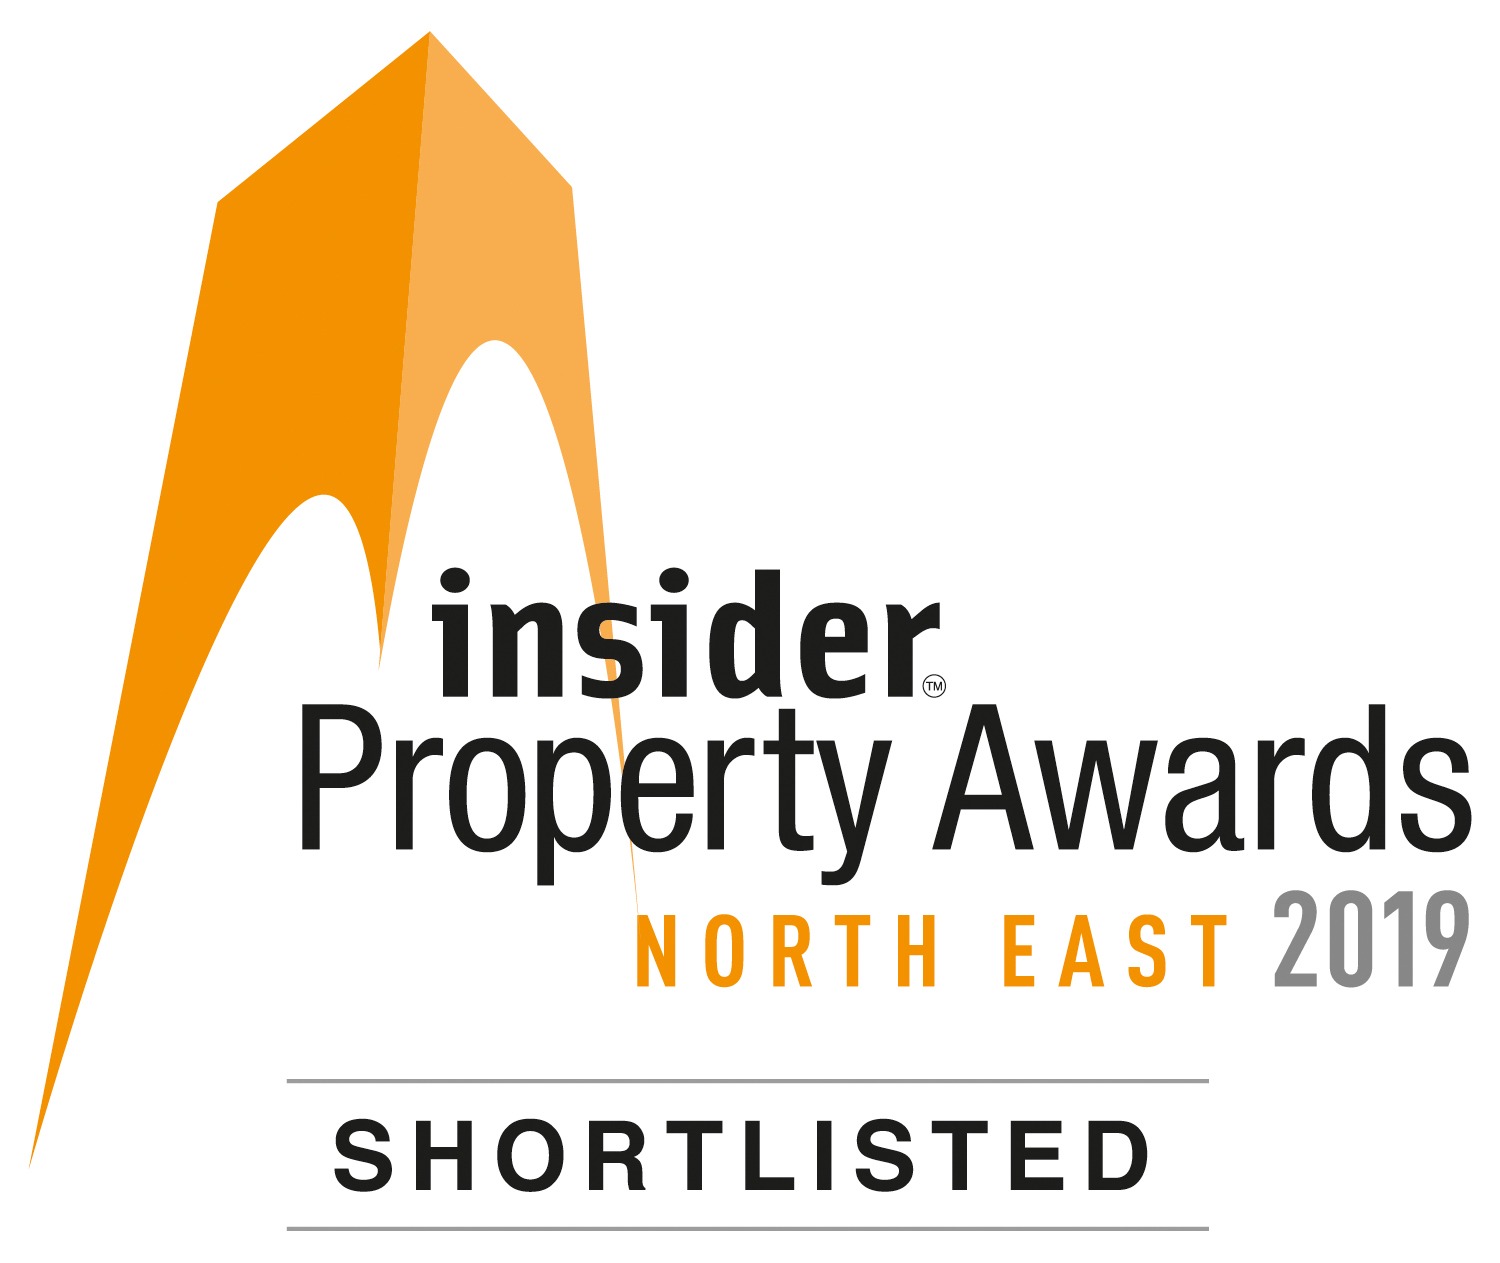 PG Legal shortlisted for North East Property Award 2019